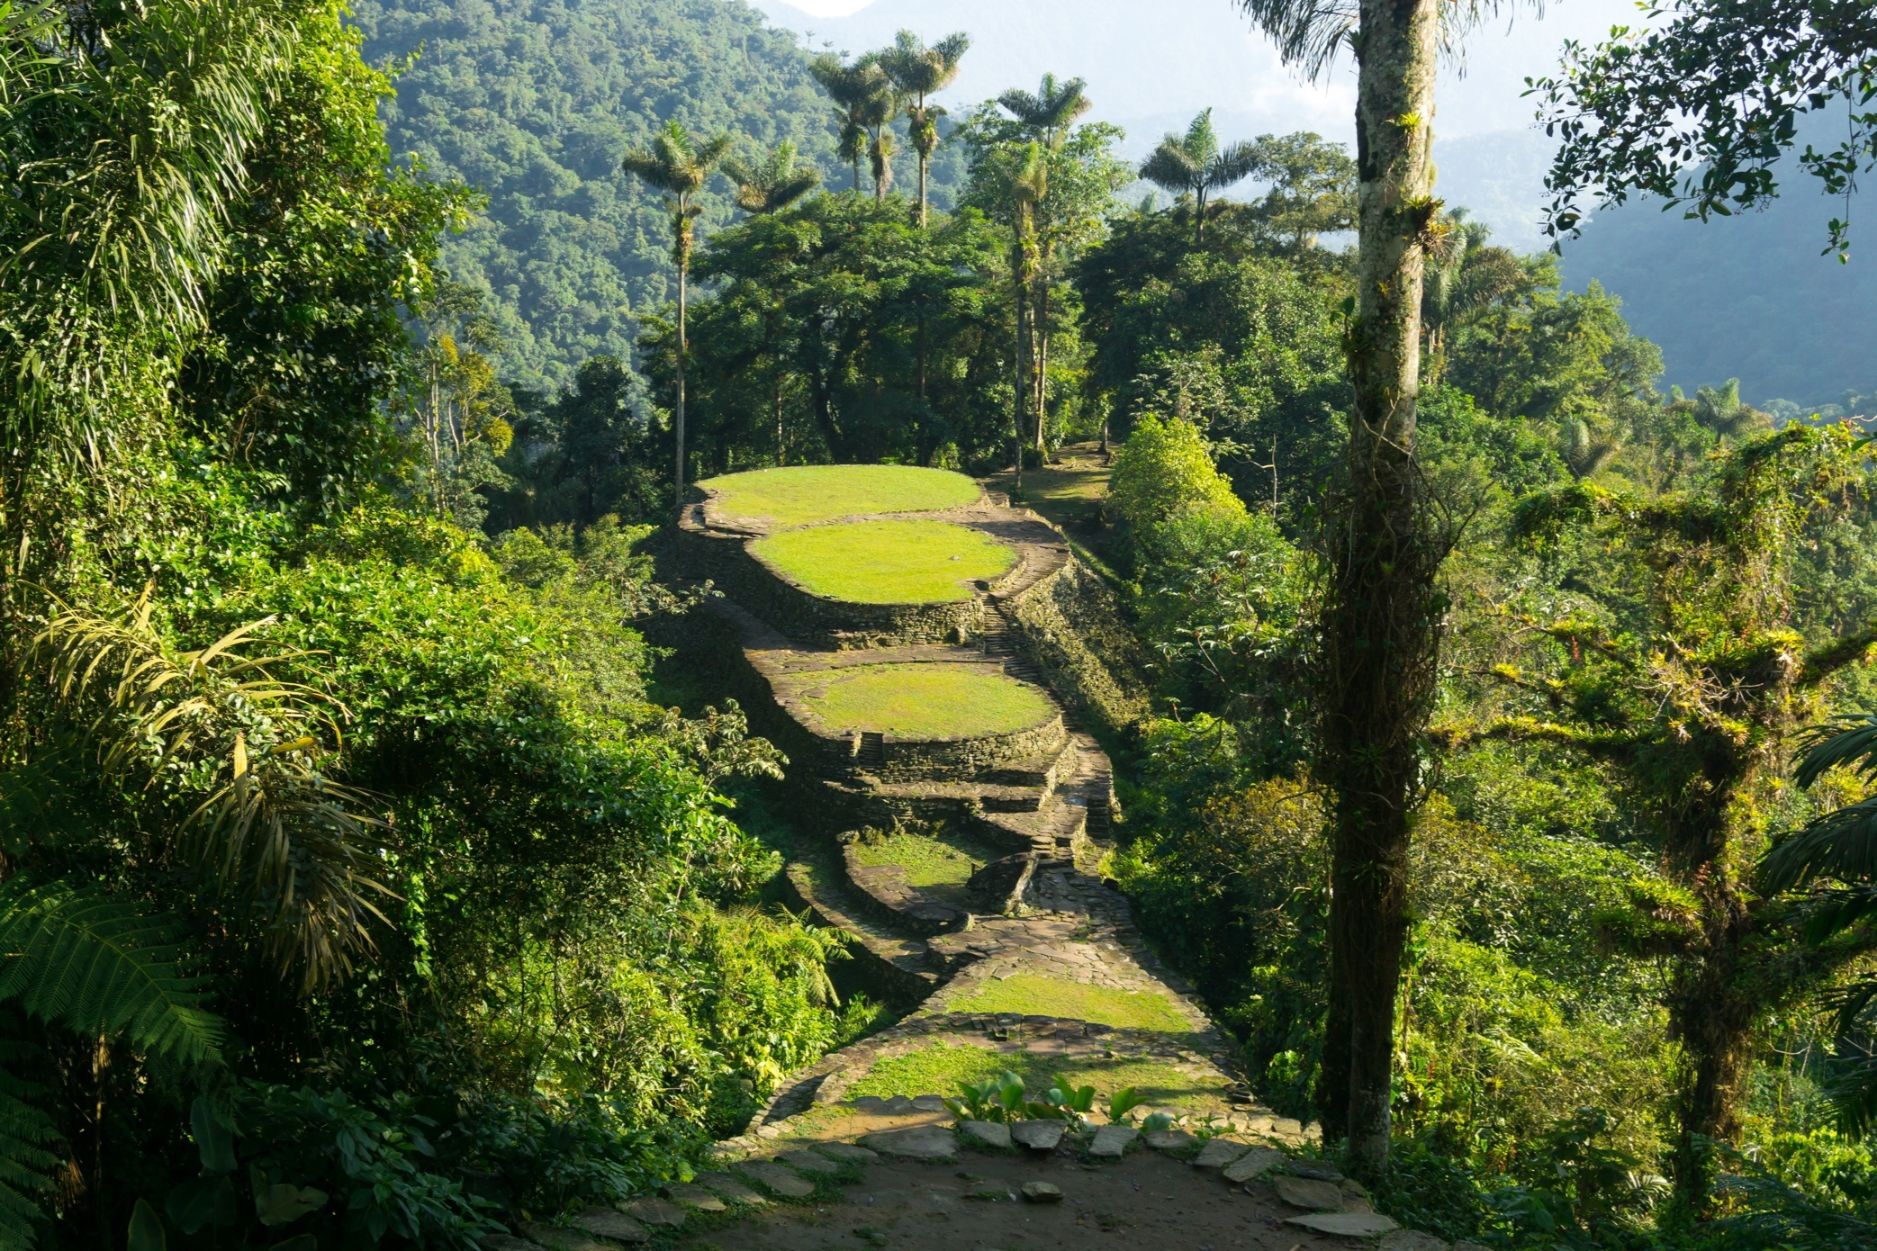 Teyuna, better known to the world as Ciudad Perdida, the Lost City. 